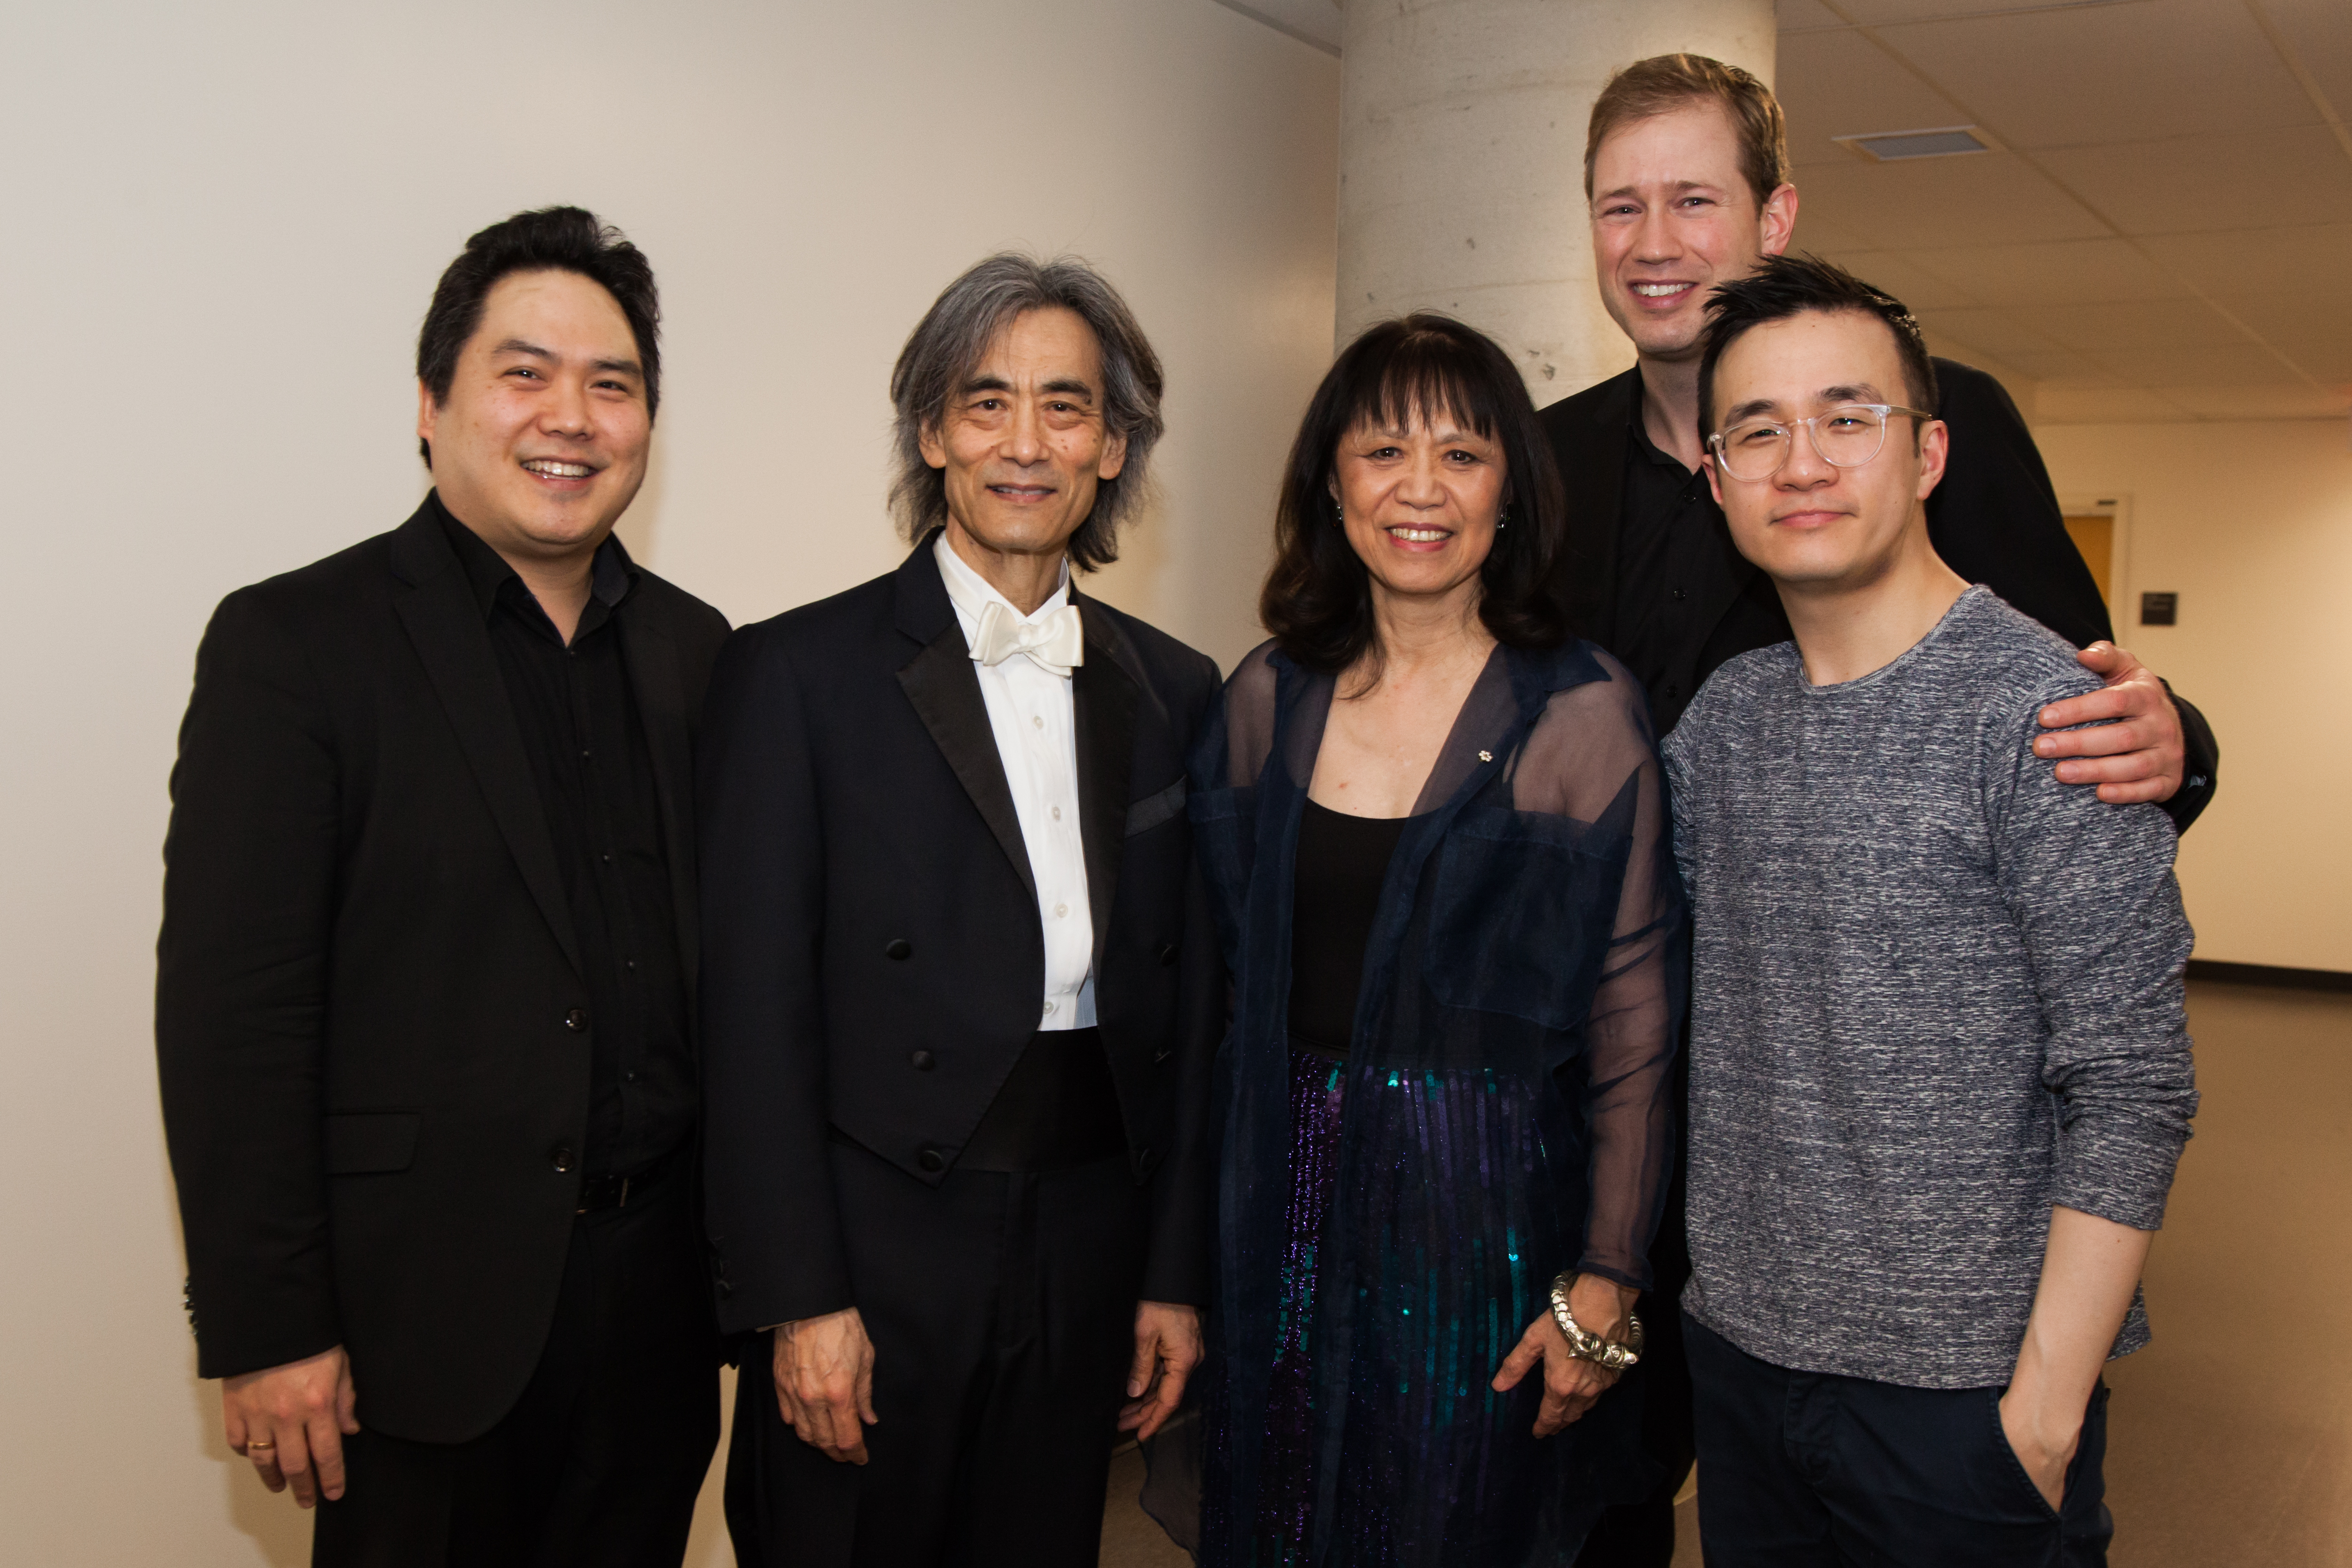 Above: Following the Montreal Symphony premiere of Alexina Louie's Triple Concerto for Three Violins and Orchestra. Yosuke Kawasaki, Kent Nagano, Alexina Louie, Jonathan Crow, Andrew Wan